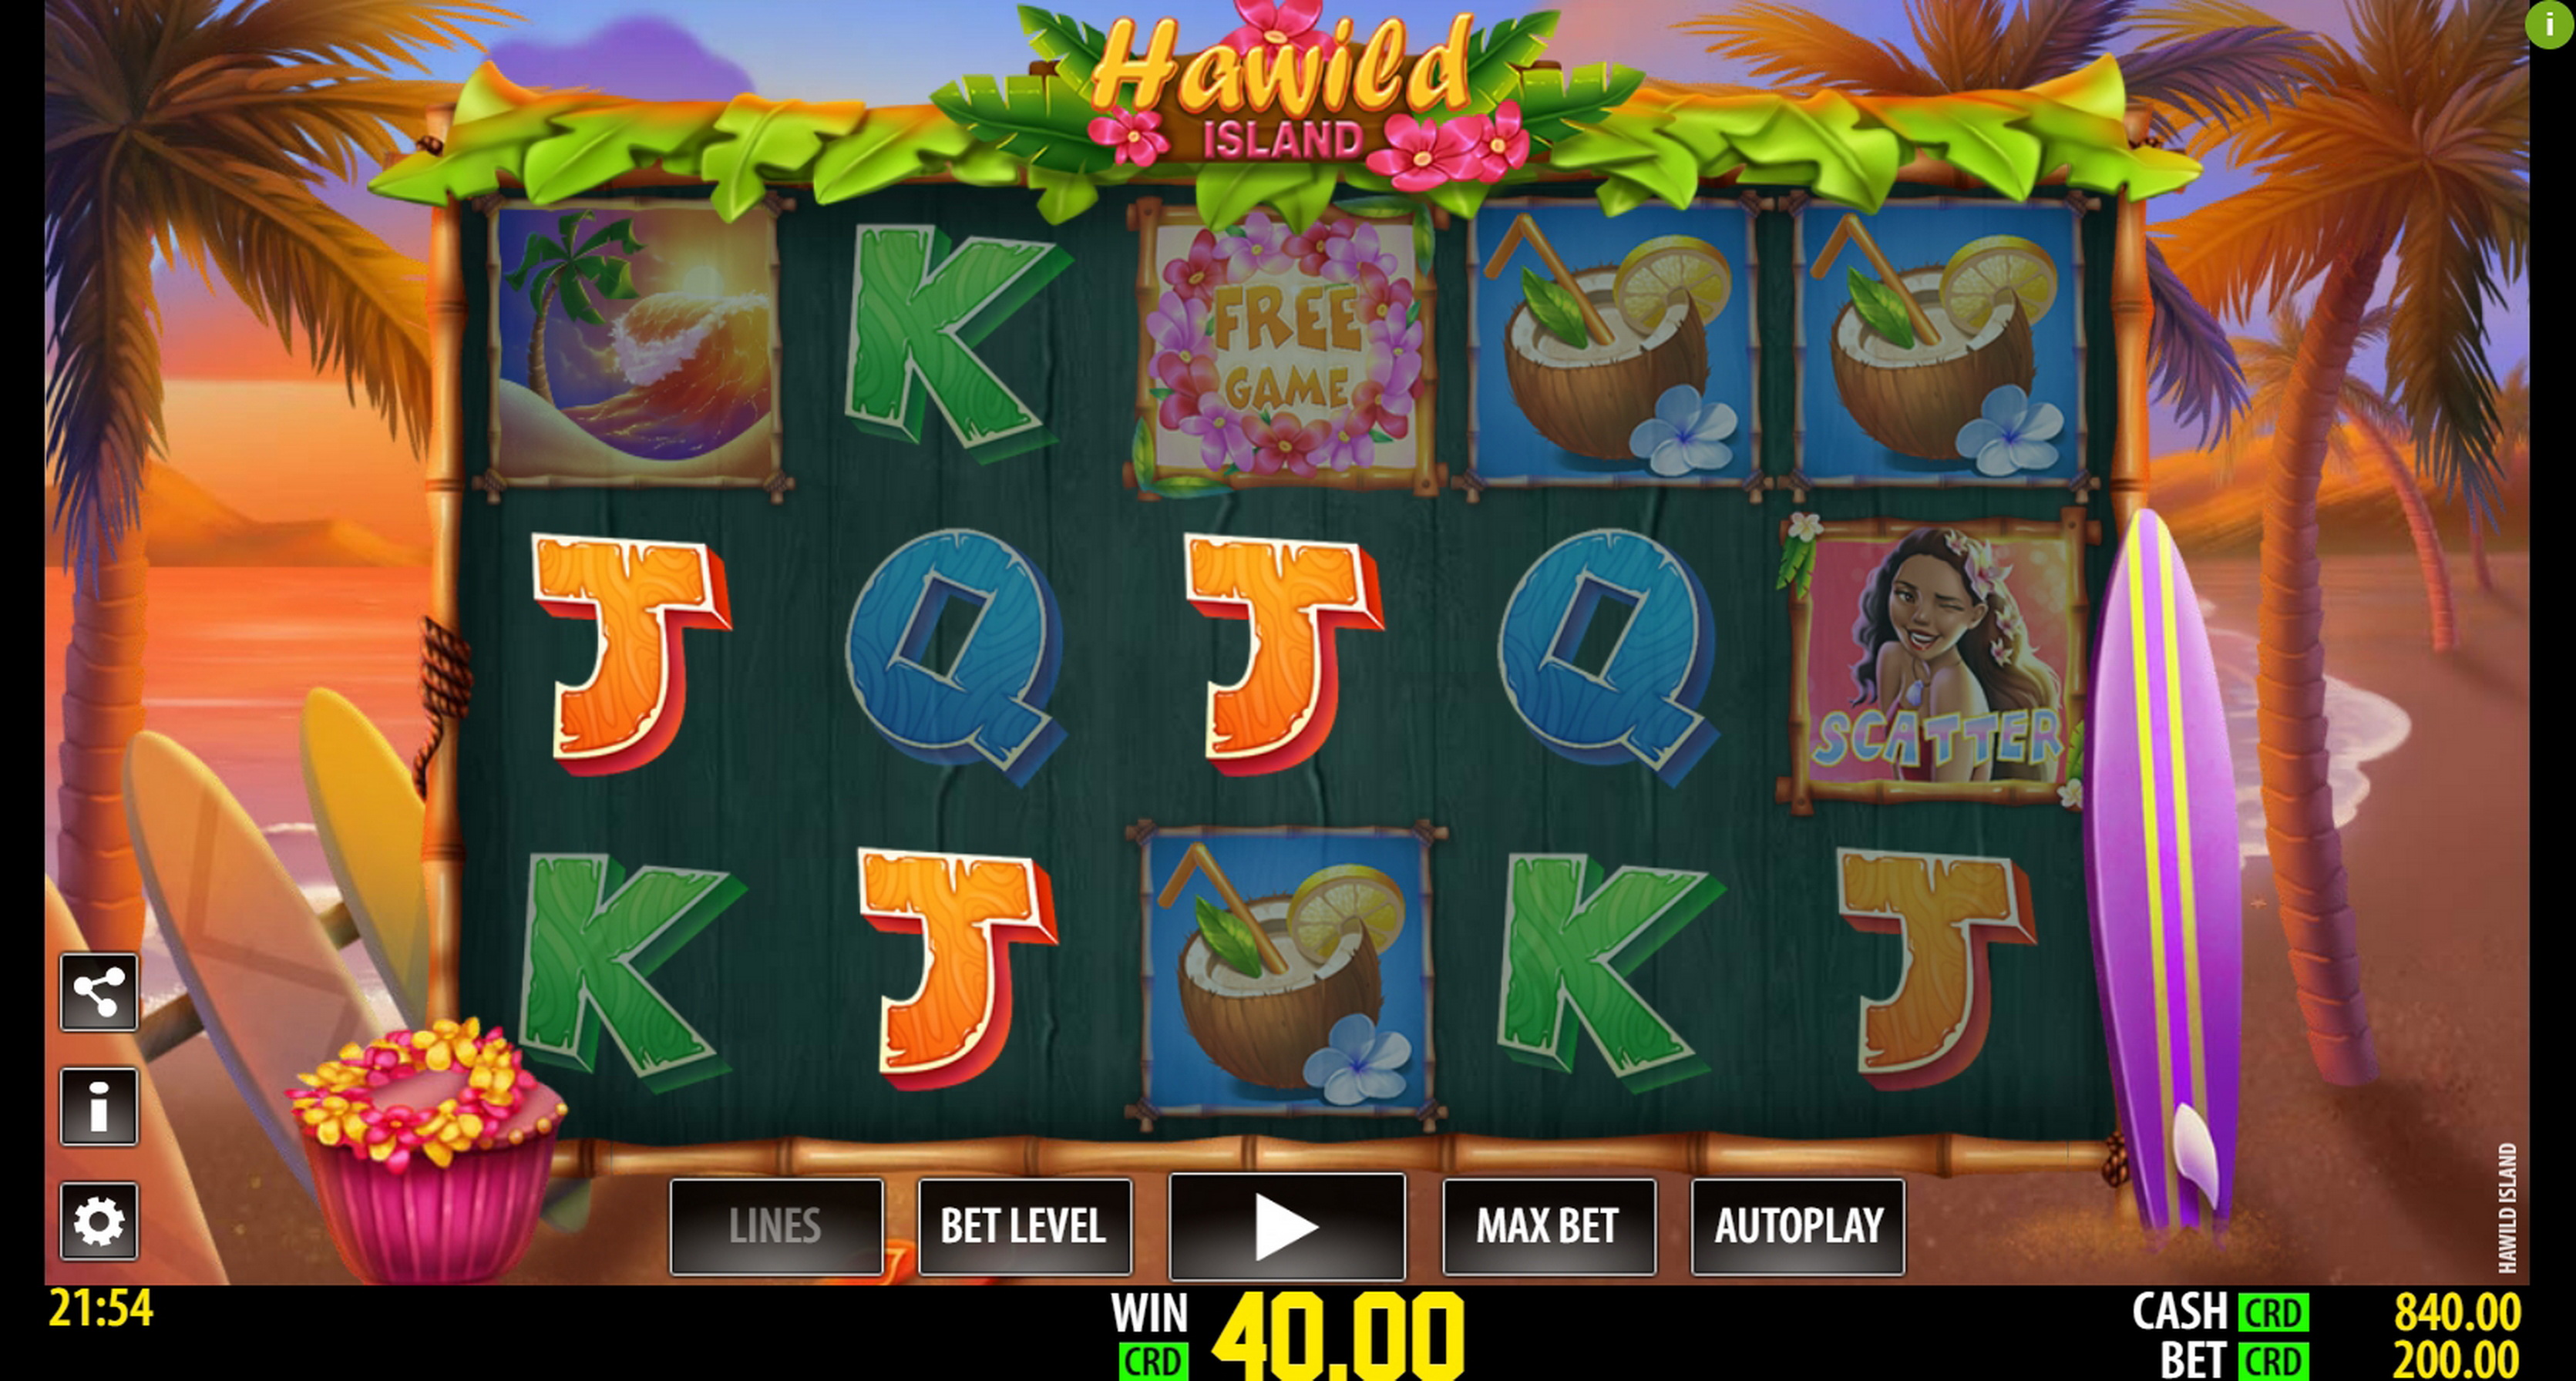 Win Money in Hawild Island Free Slot Game by World Match